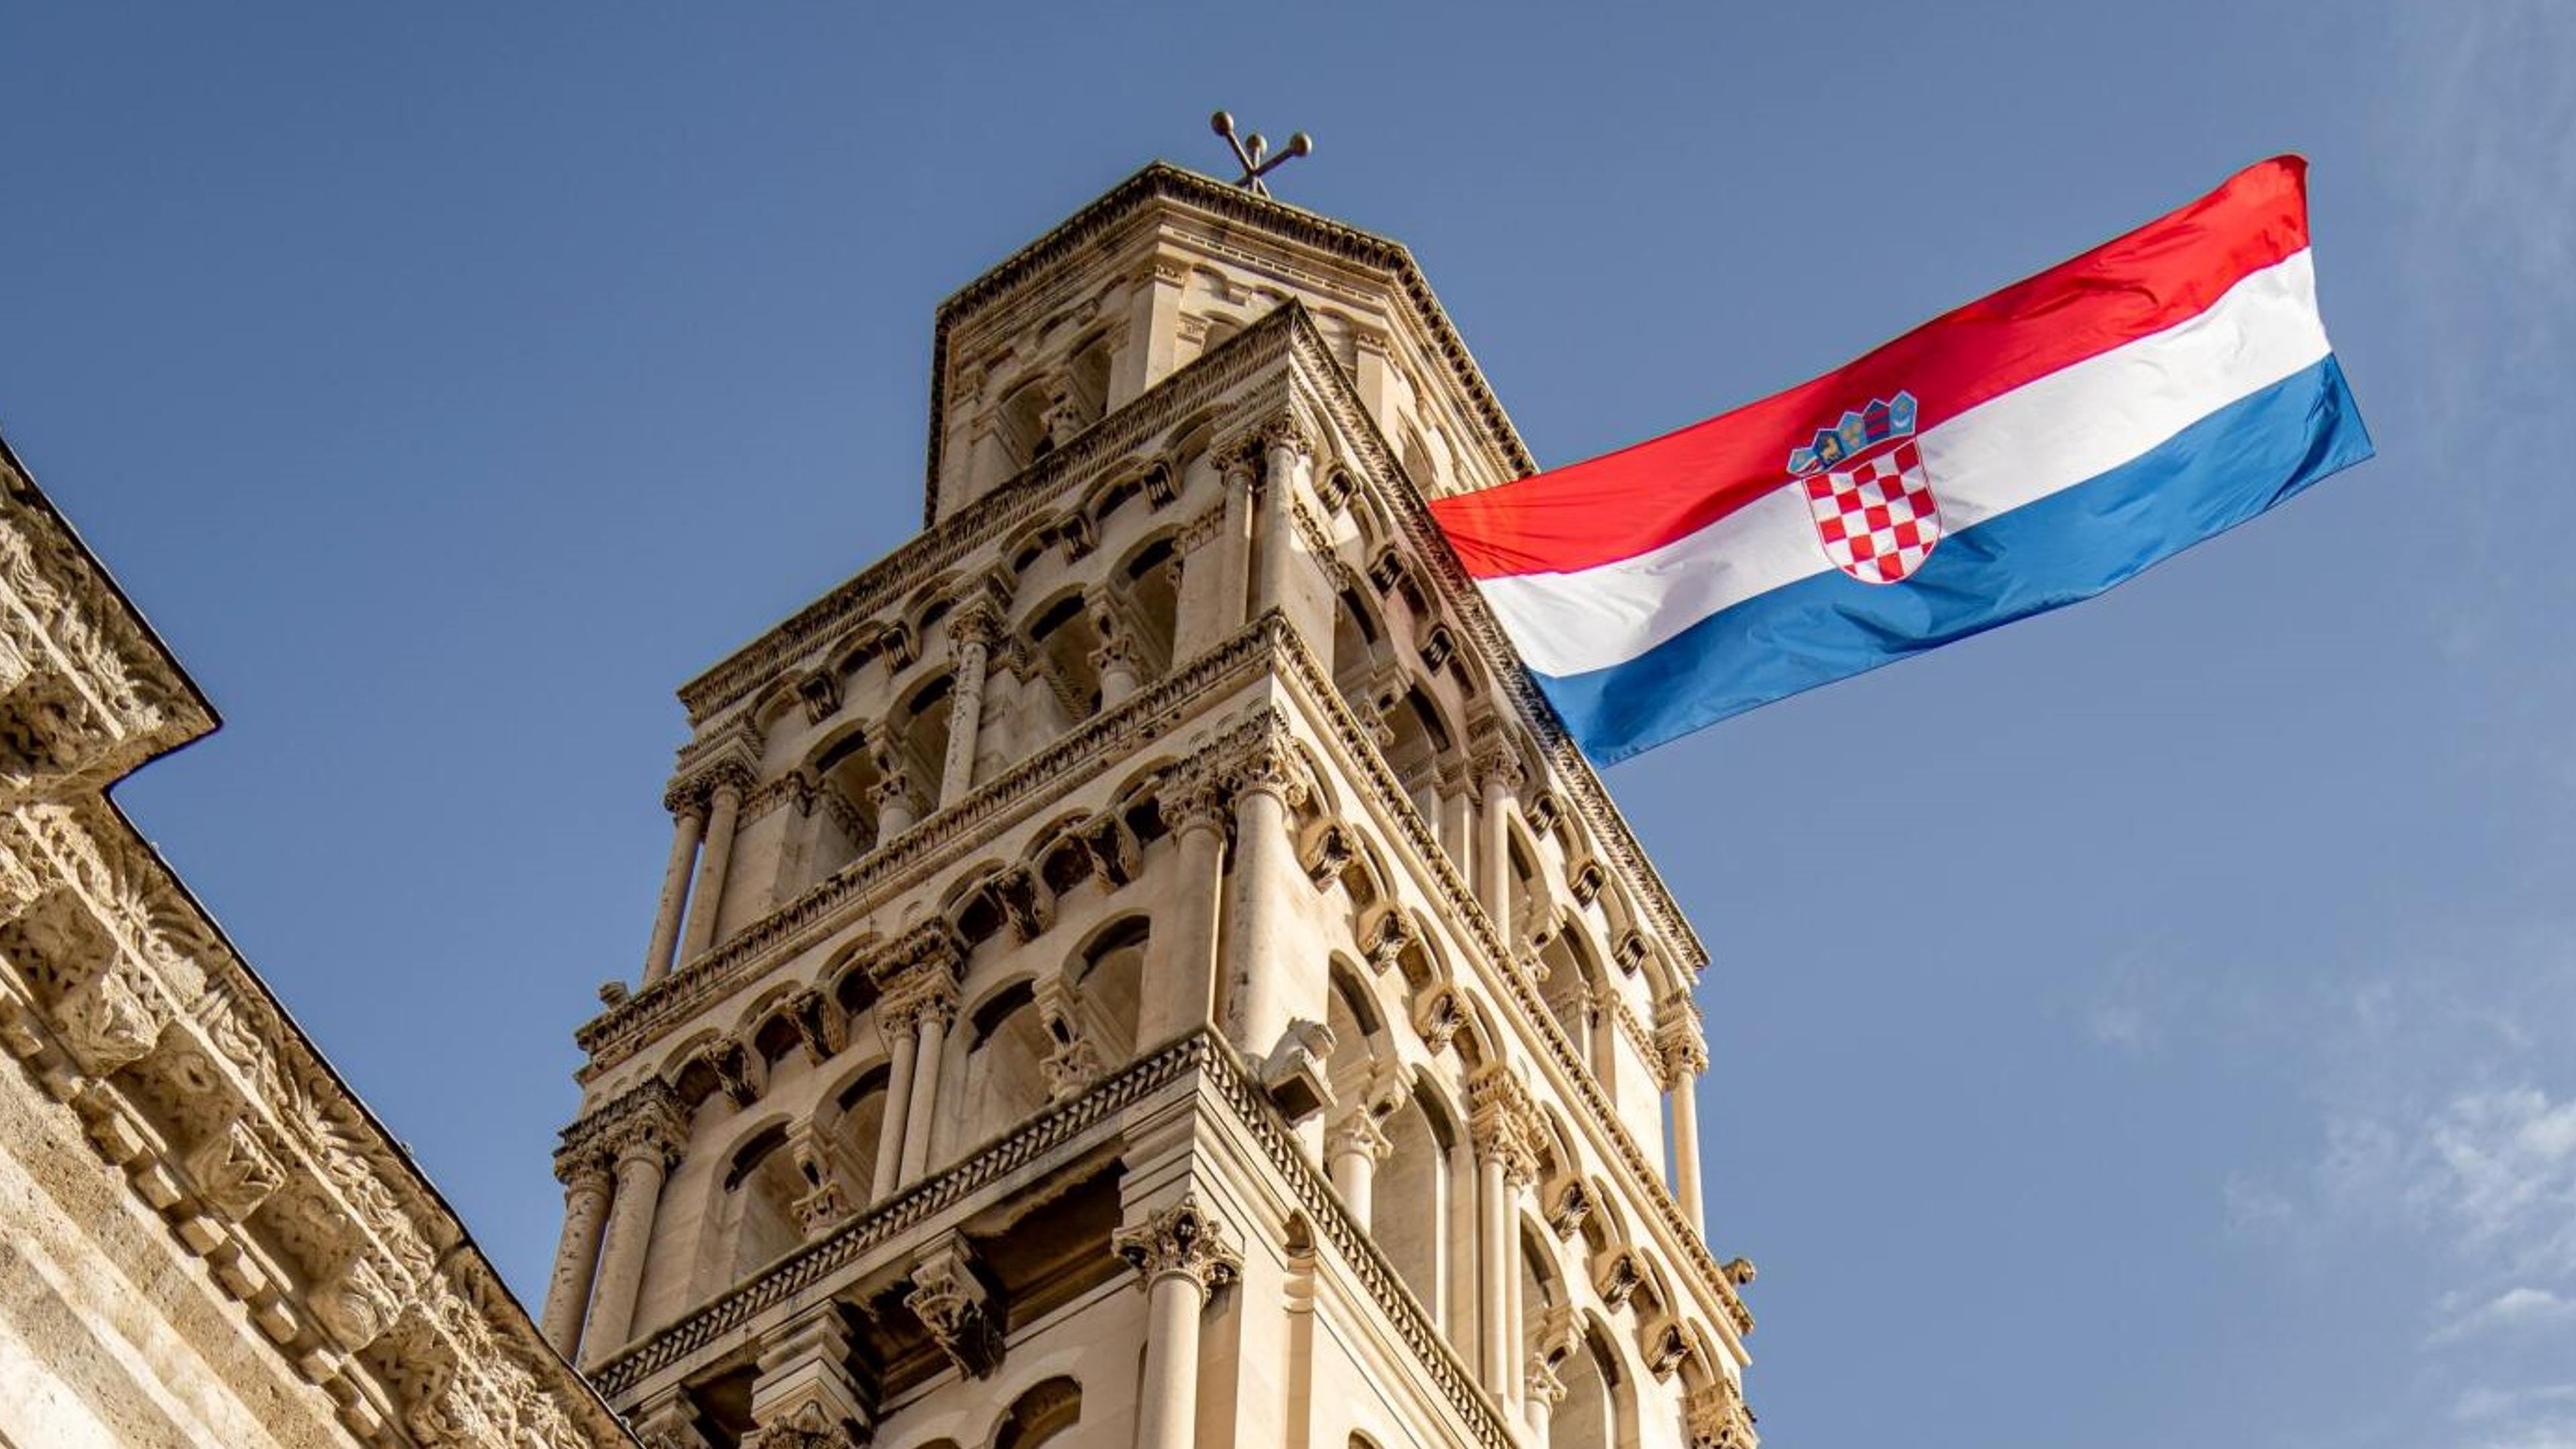 Old building and Croatian flag